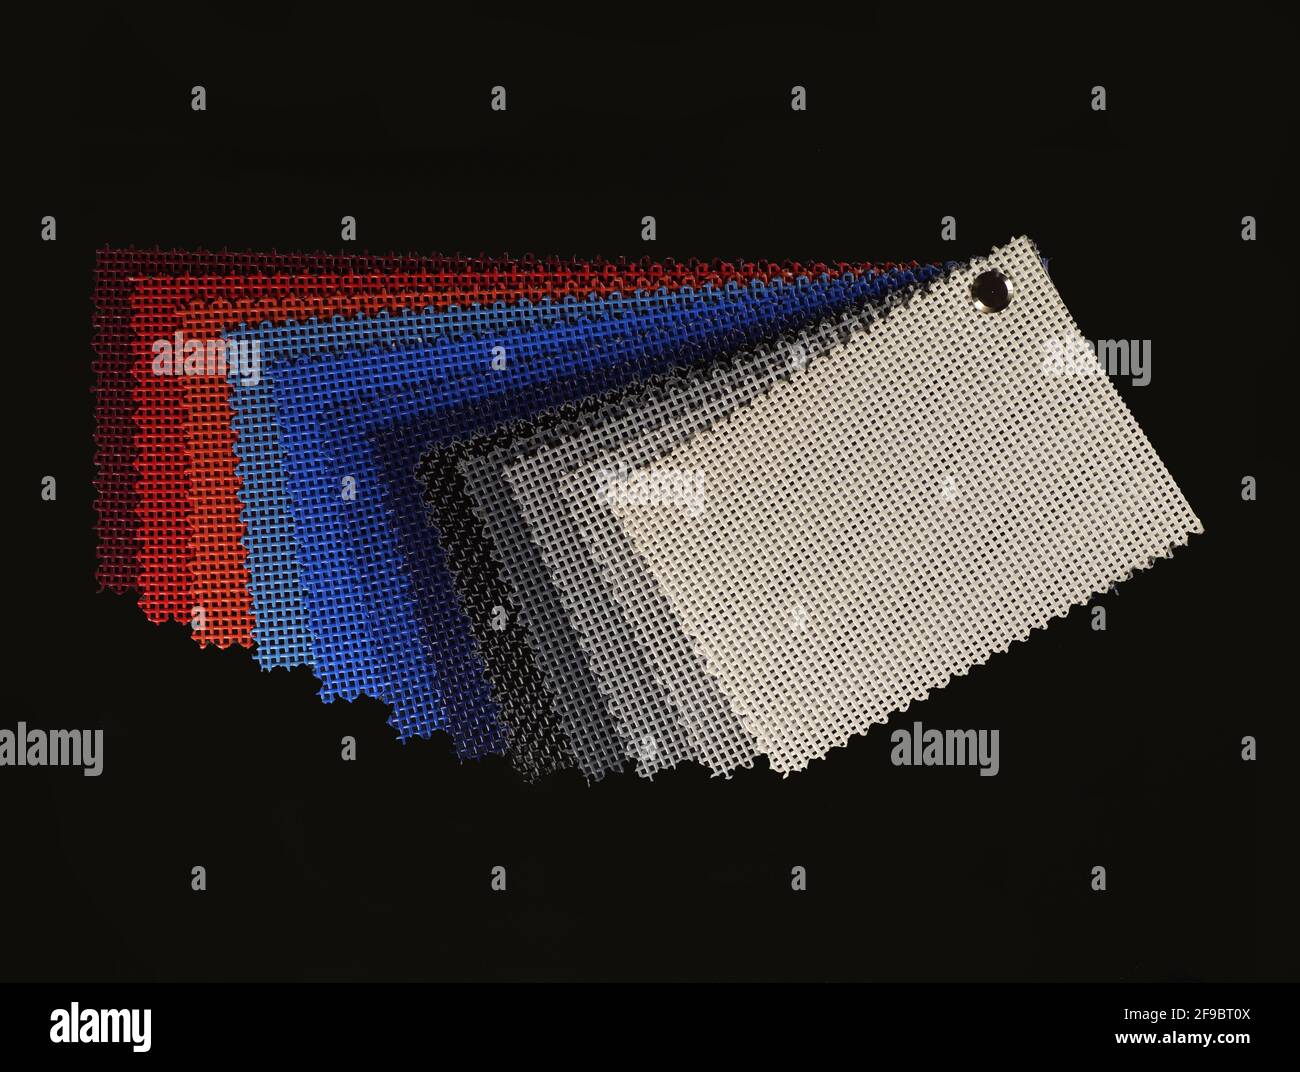 Advertisement. Color chart of one of the most popular advertising media: PVC coated banner type - mesh. Stock Photo